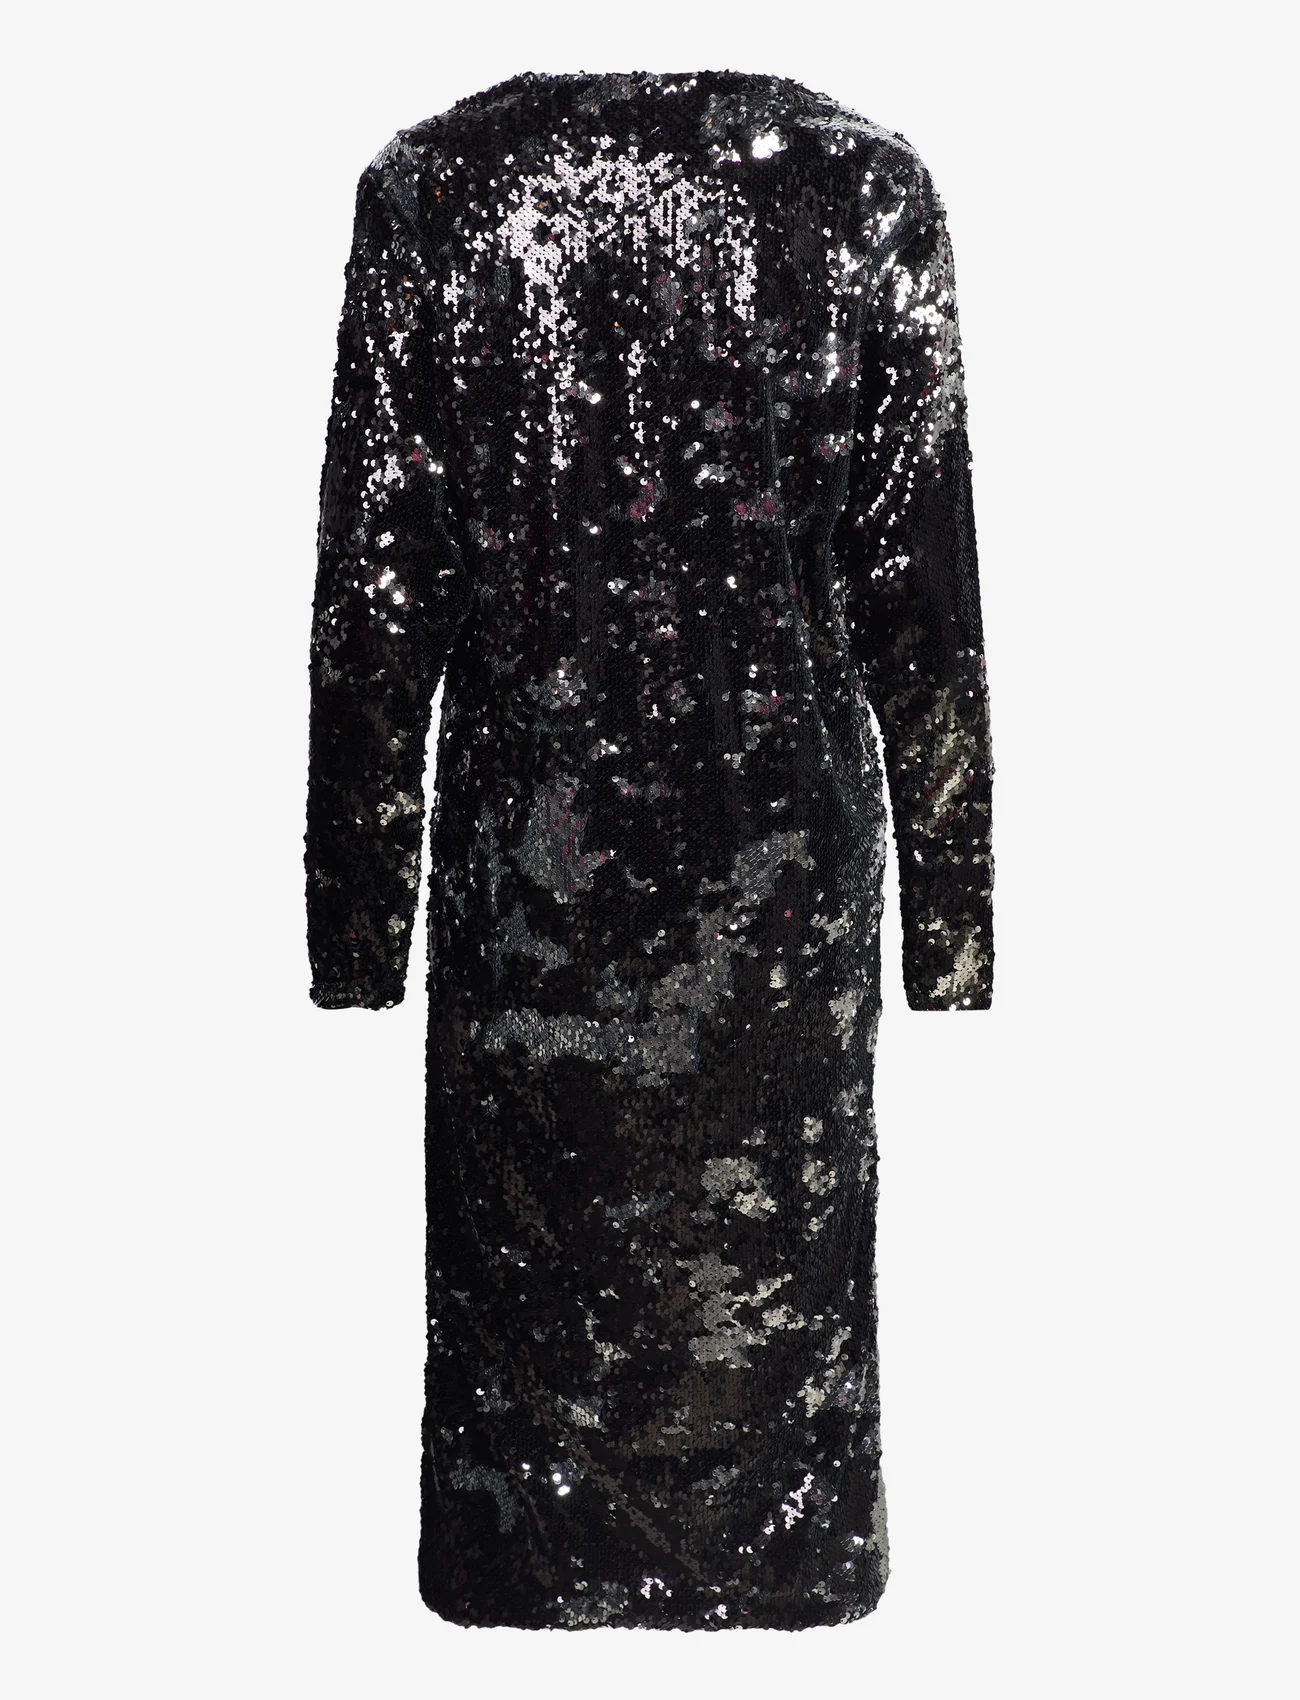 Mads Nørgaard - Neo Sequins Phalia Dress - party wear at outlet prices - black/silver - 1